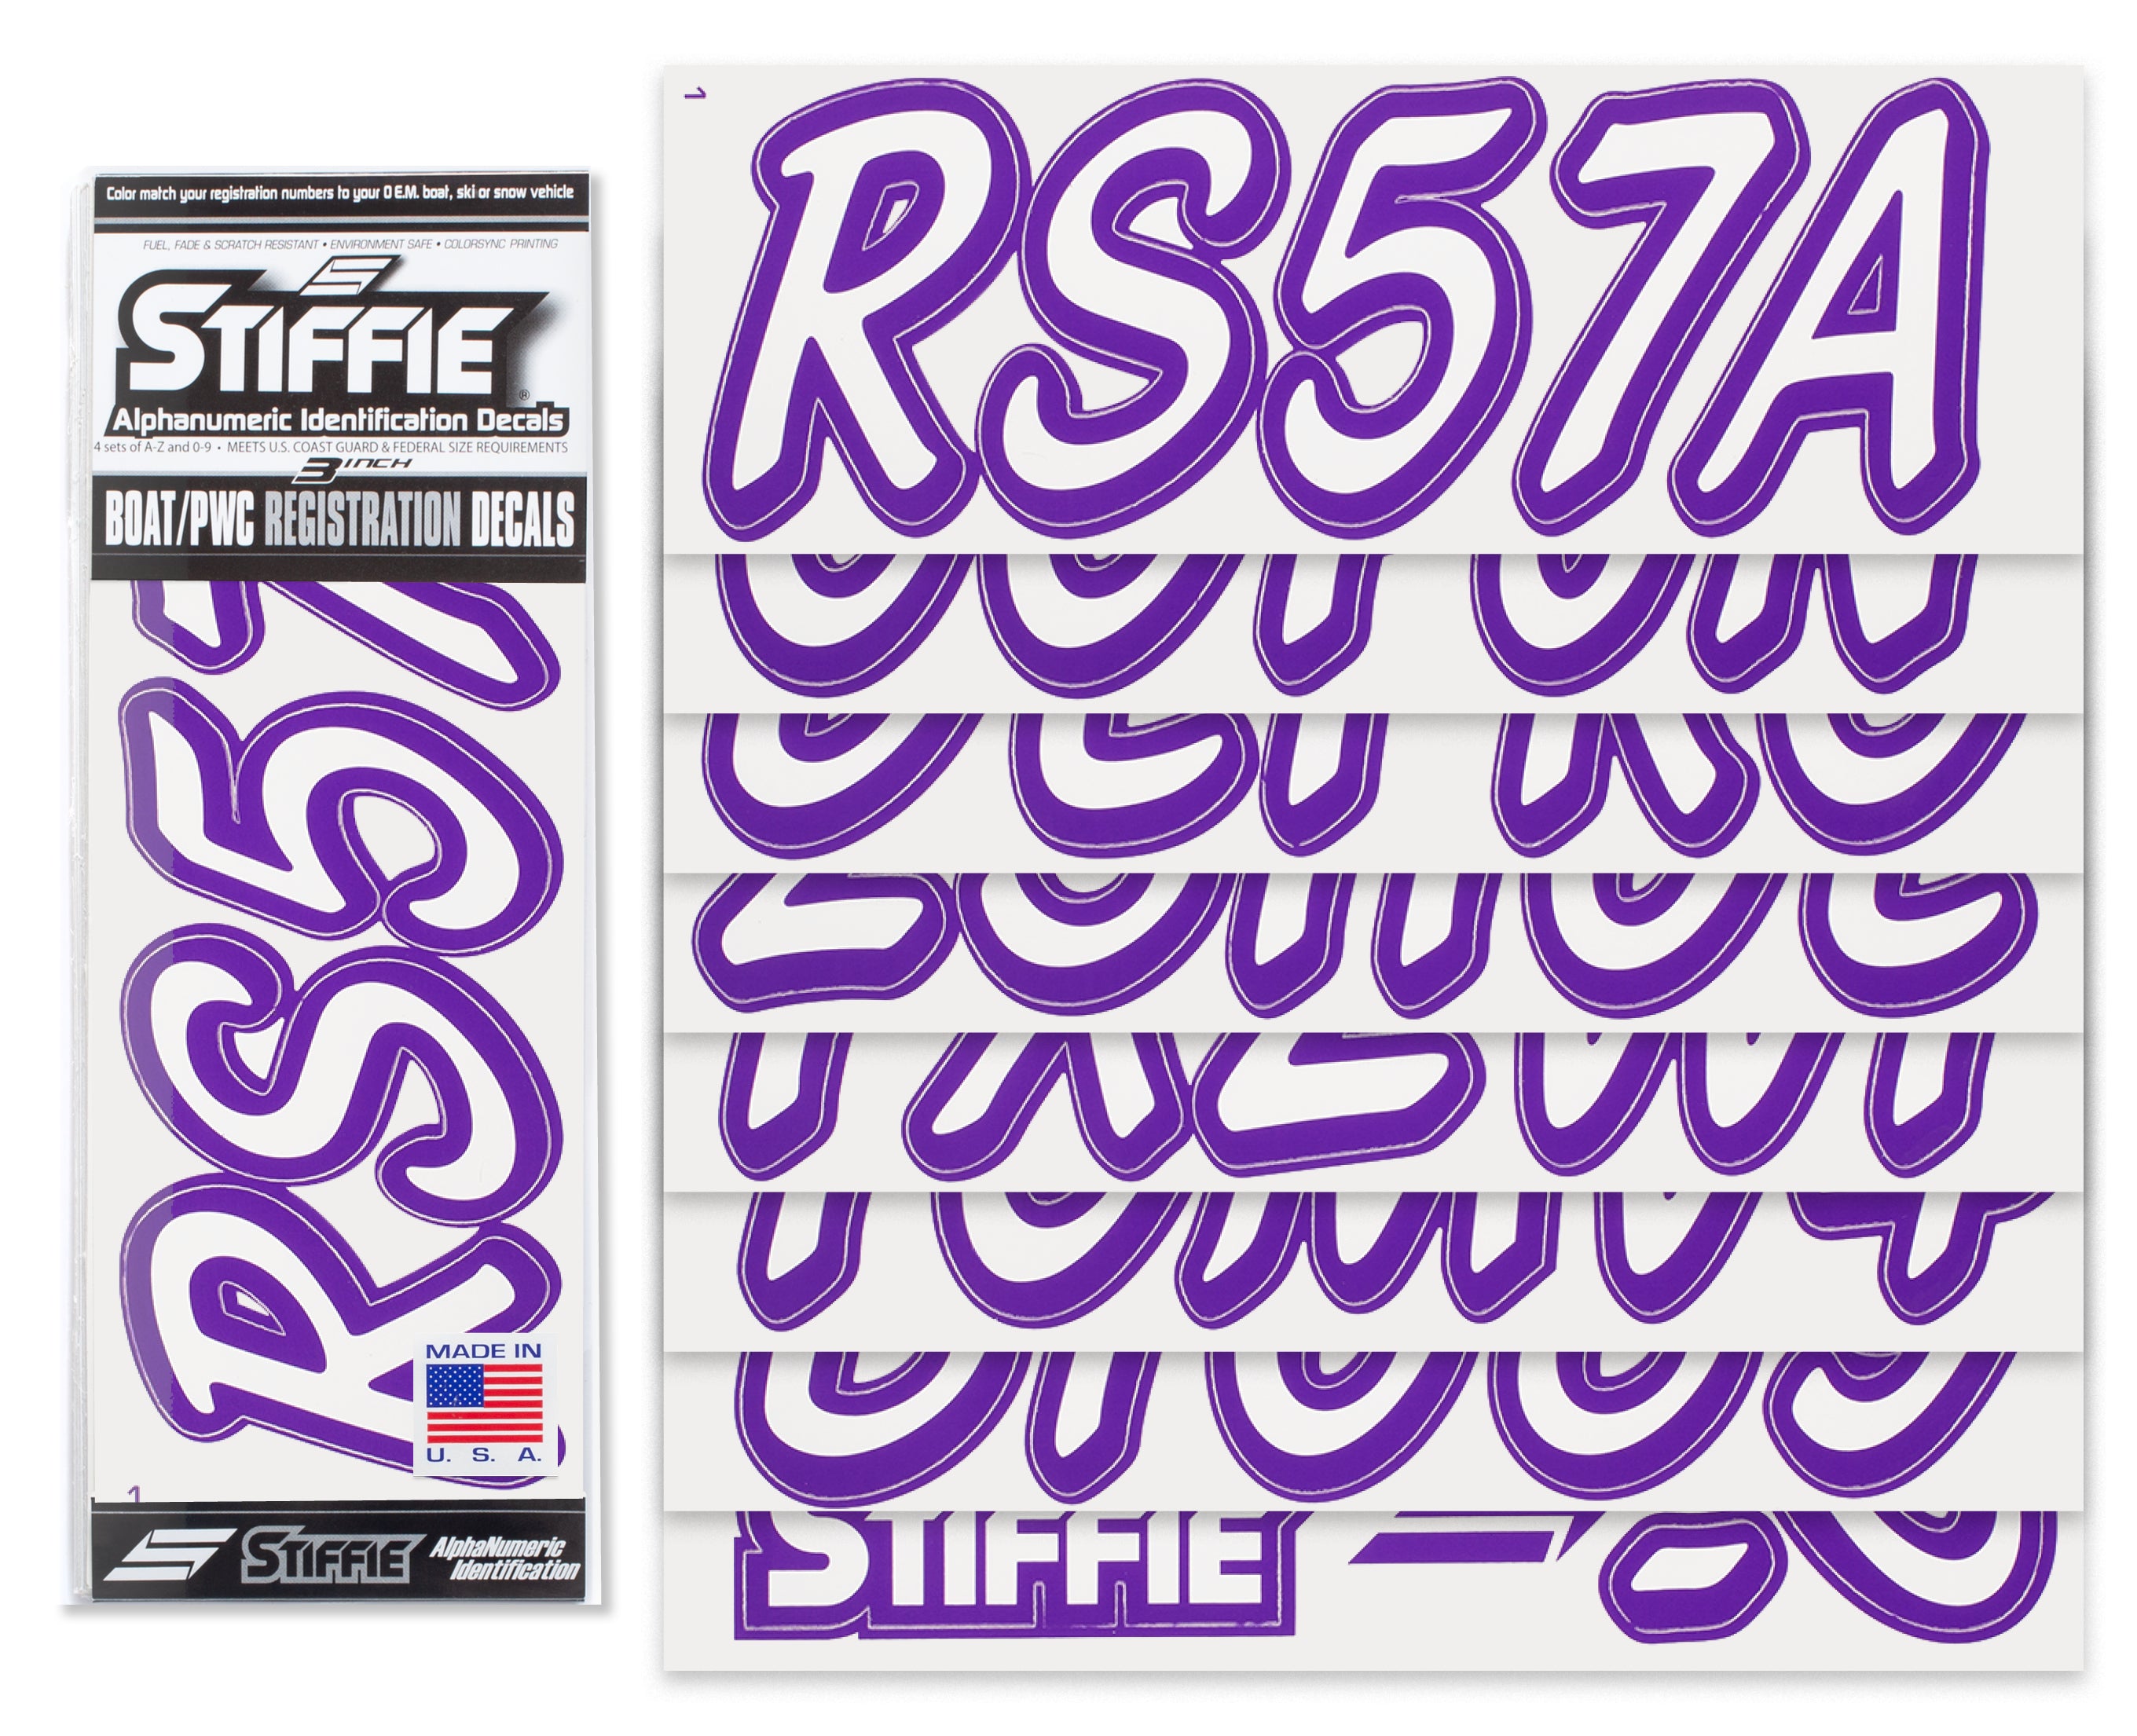 STIFFIE Whipline Solid White/Purple 3" Alpha-Numeric Registration Identification Numbers Stickers Decals for Boats & Personal Watercraft